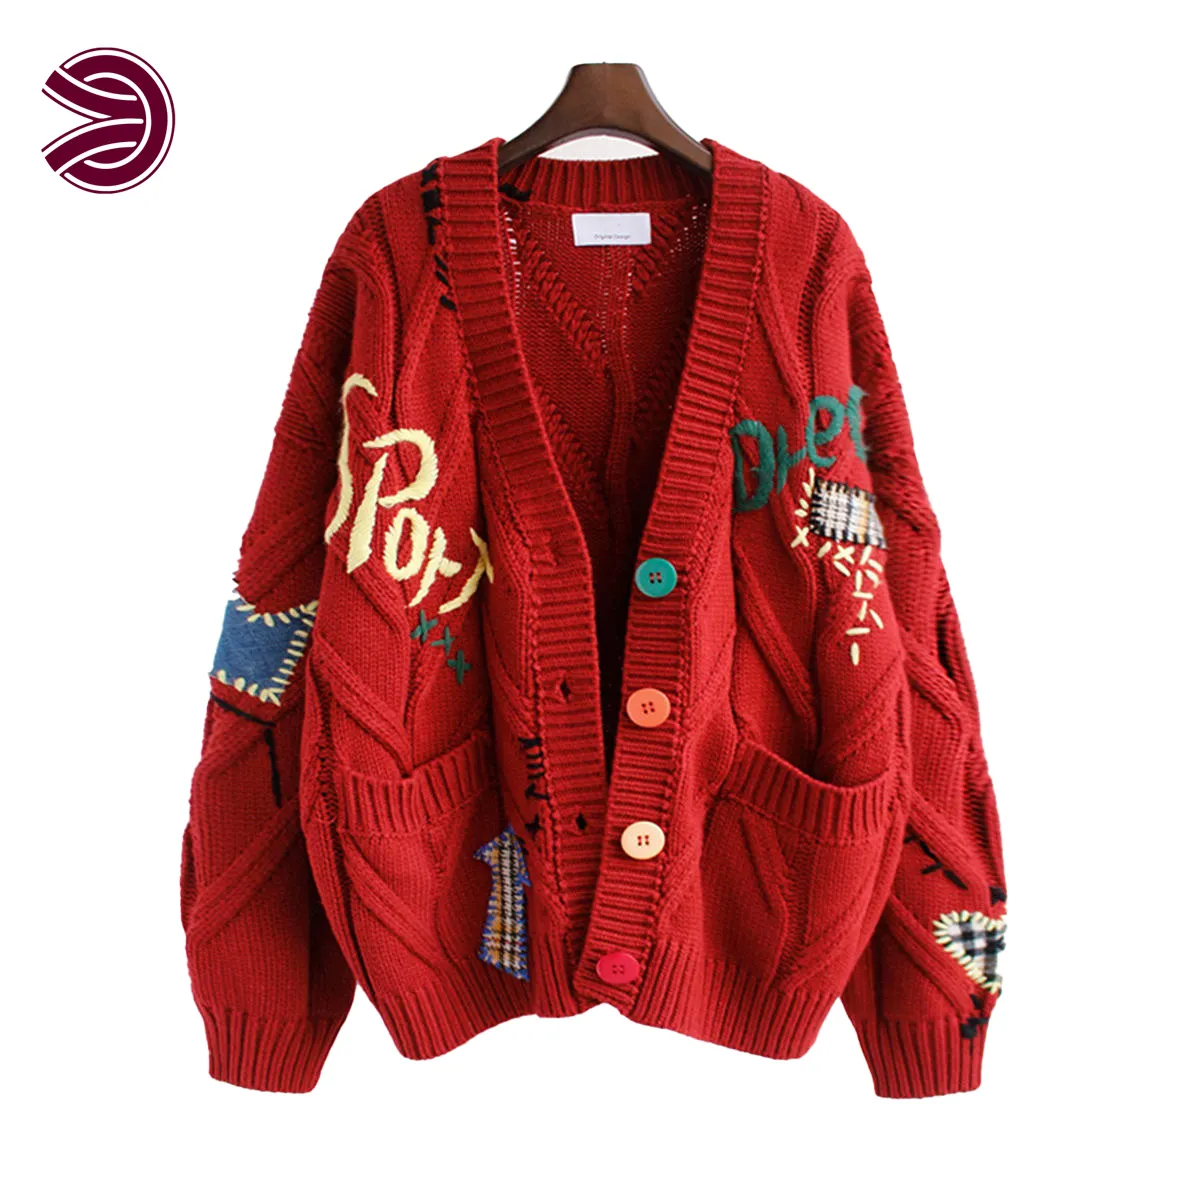 Autumn Winter Womens Oversized Ladies Sweaters Cardigan Warm Knitted Sweater Jacket Pocket Embroidery Knit Cardigans Coats